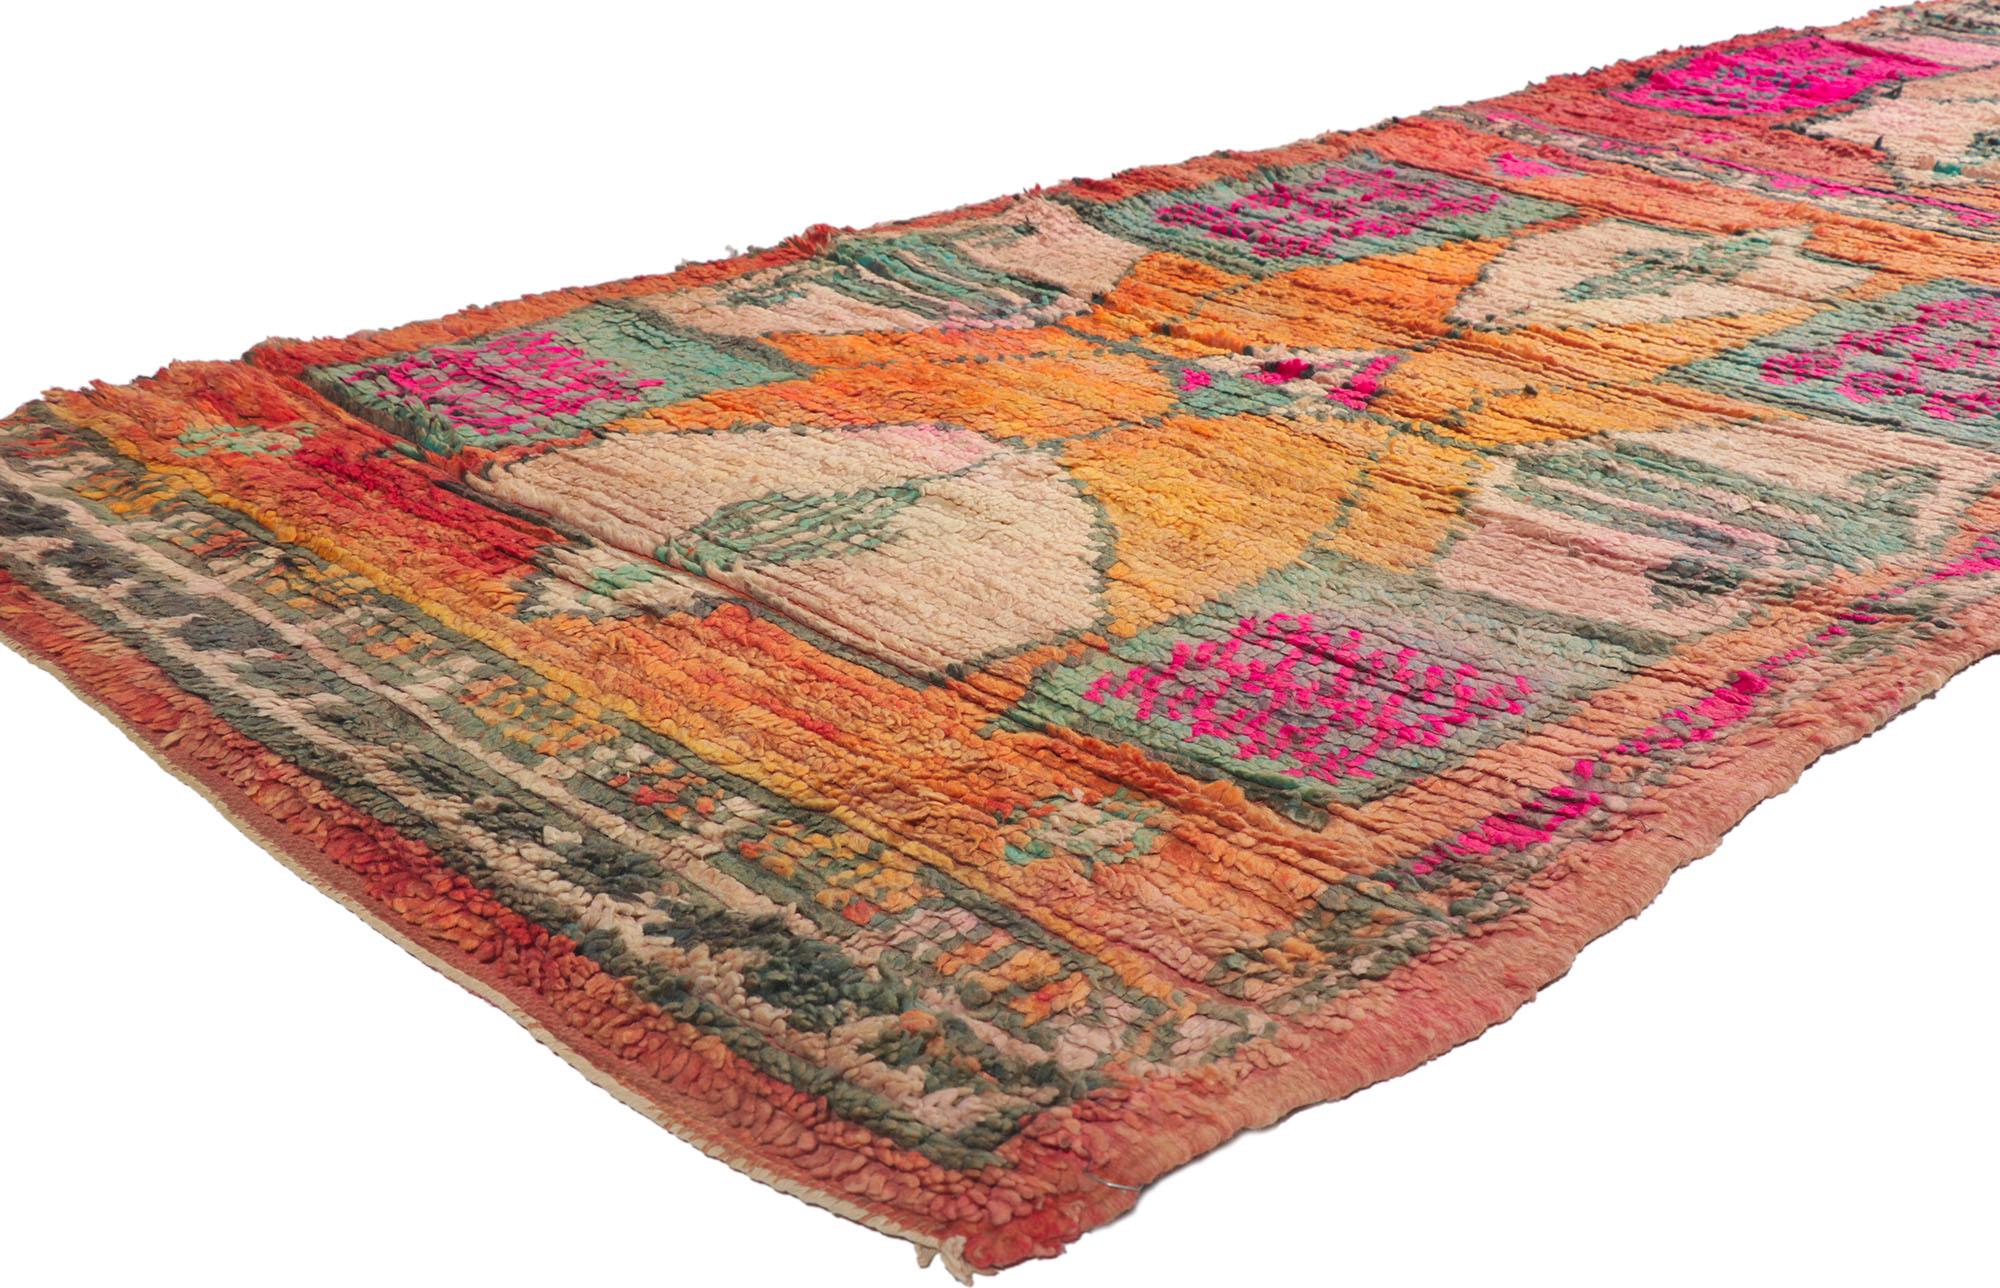 21465 vintage Berber Moroccan Runner with Bohemian Tribal style 03'08 x 14'10. Showcasing an expressive design, incredible detail and texture, this hand knotted wool contemporary Berber Moroccan runner is a captivating vision of woven beauty. The